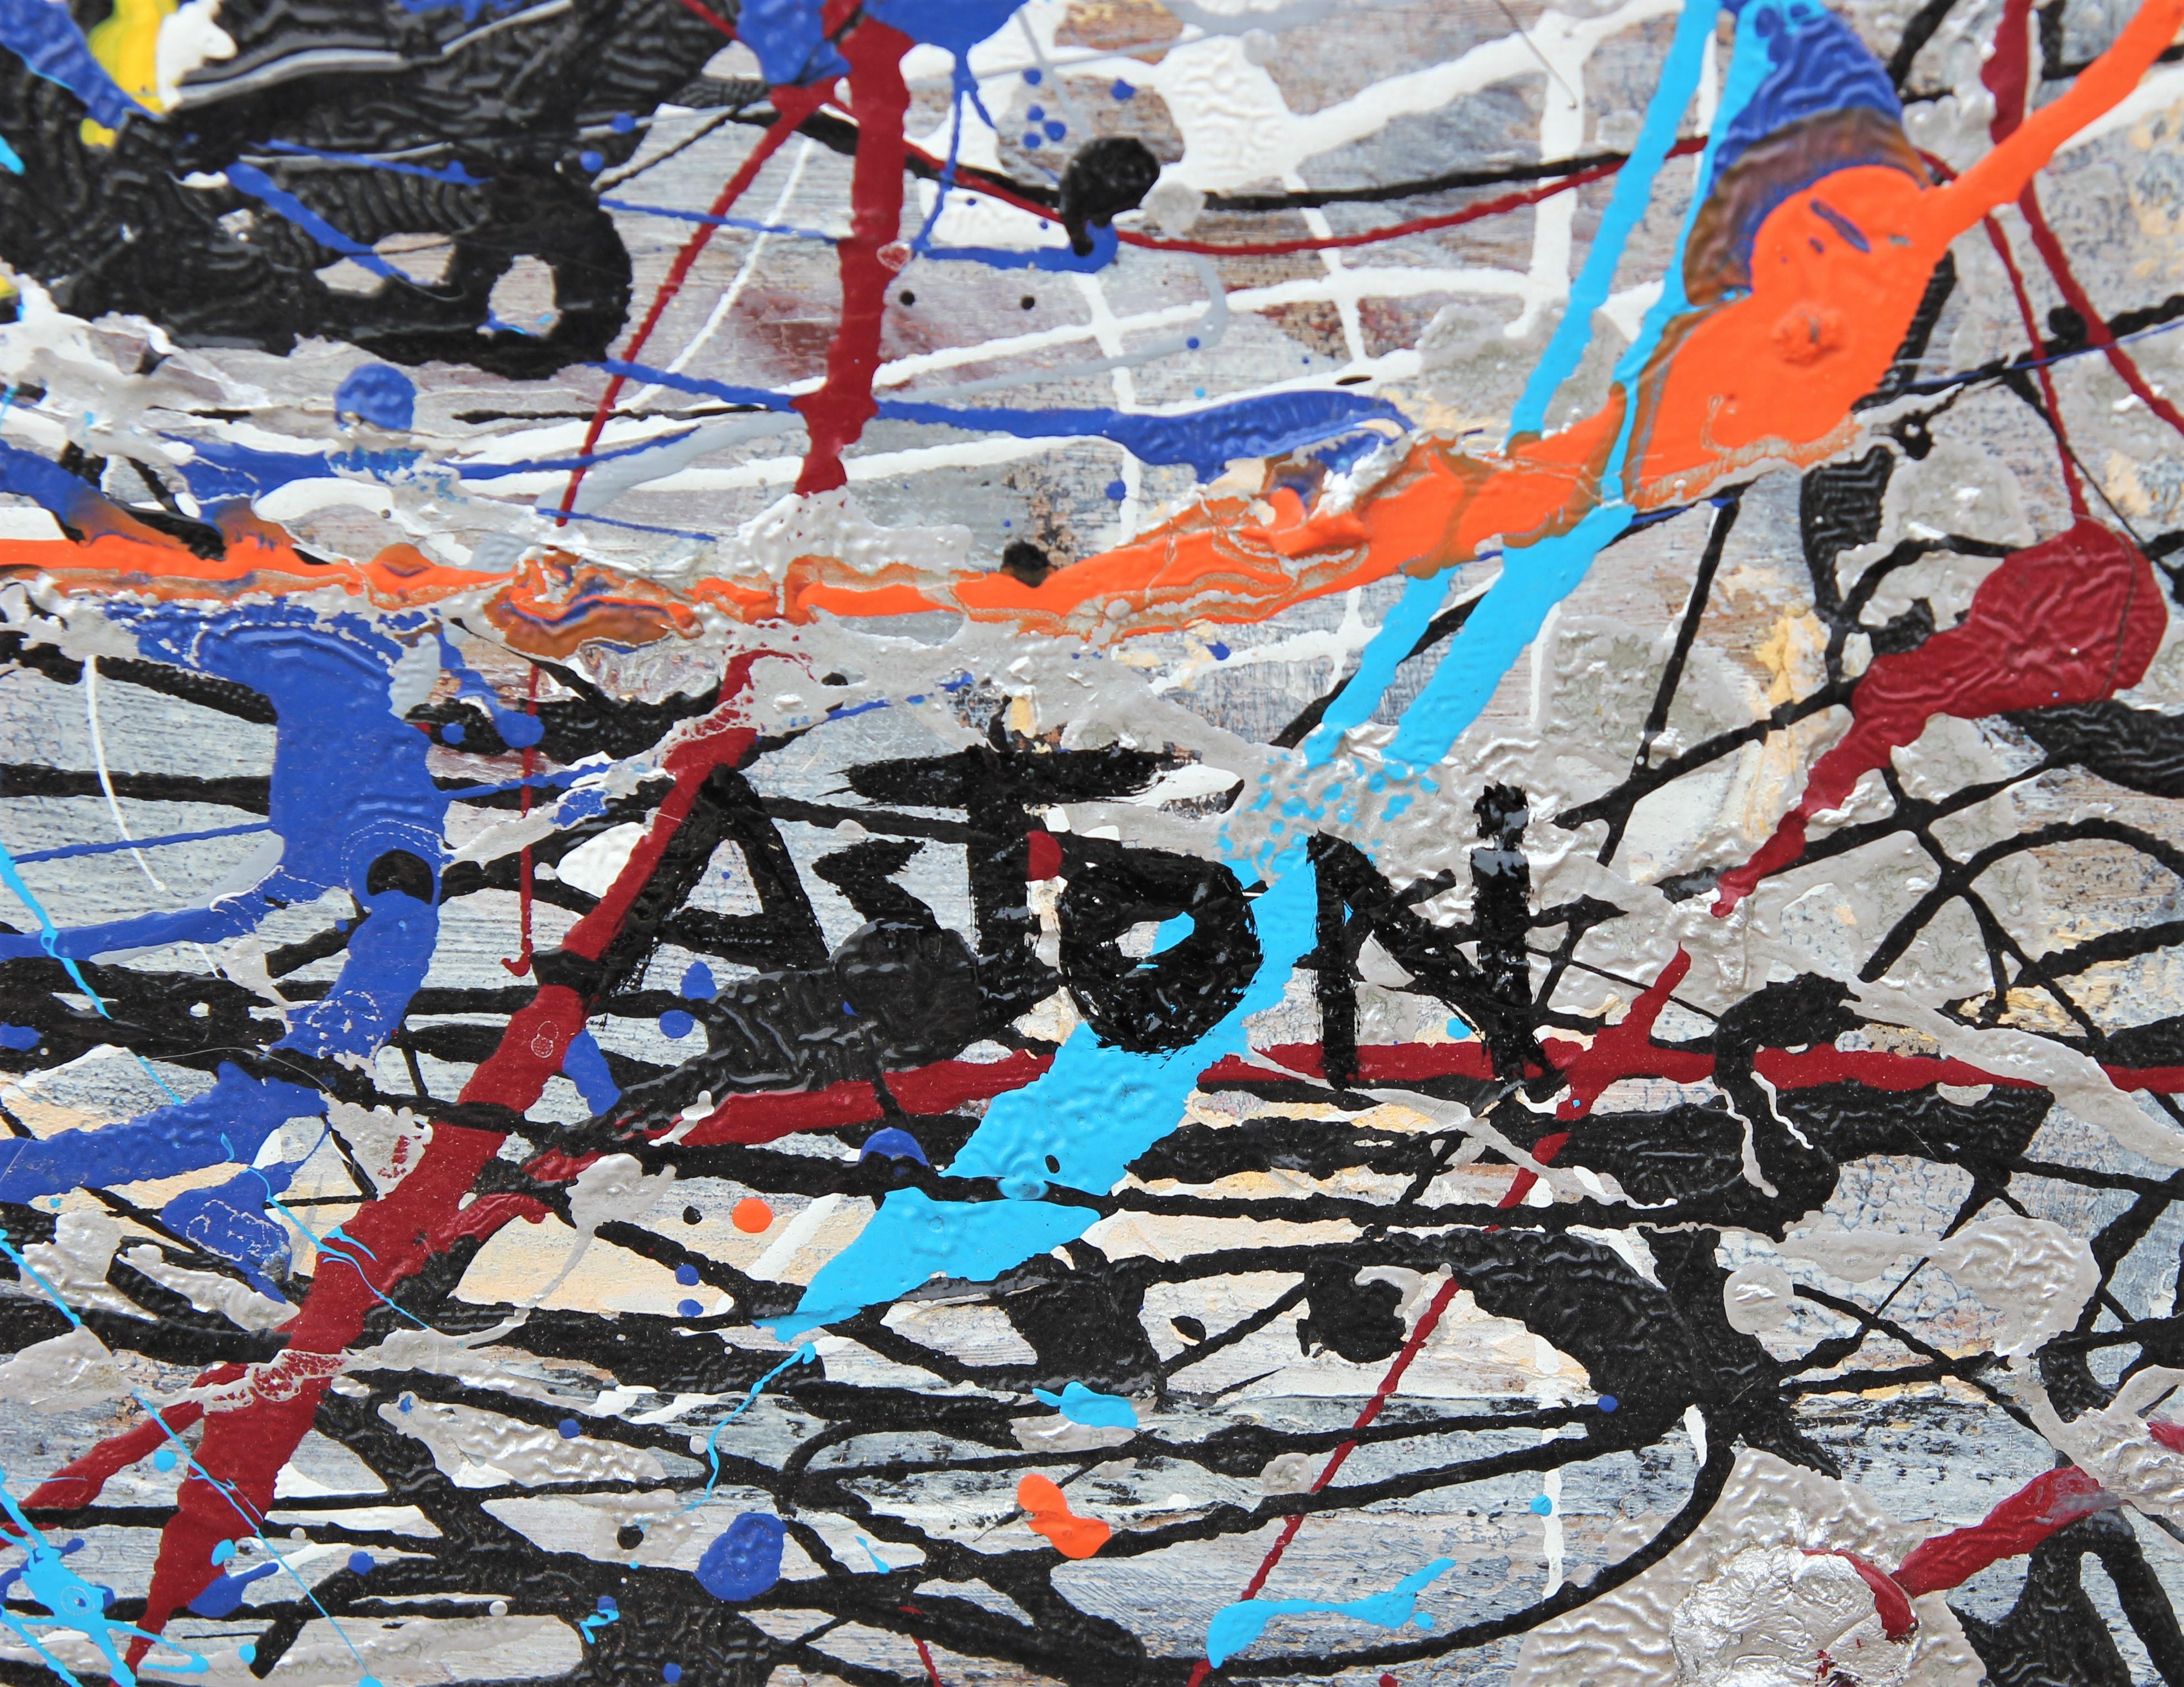 Colorful Blue Abstract Expressionist Painting in the Style of Jackson Pollock  1